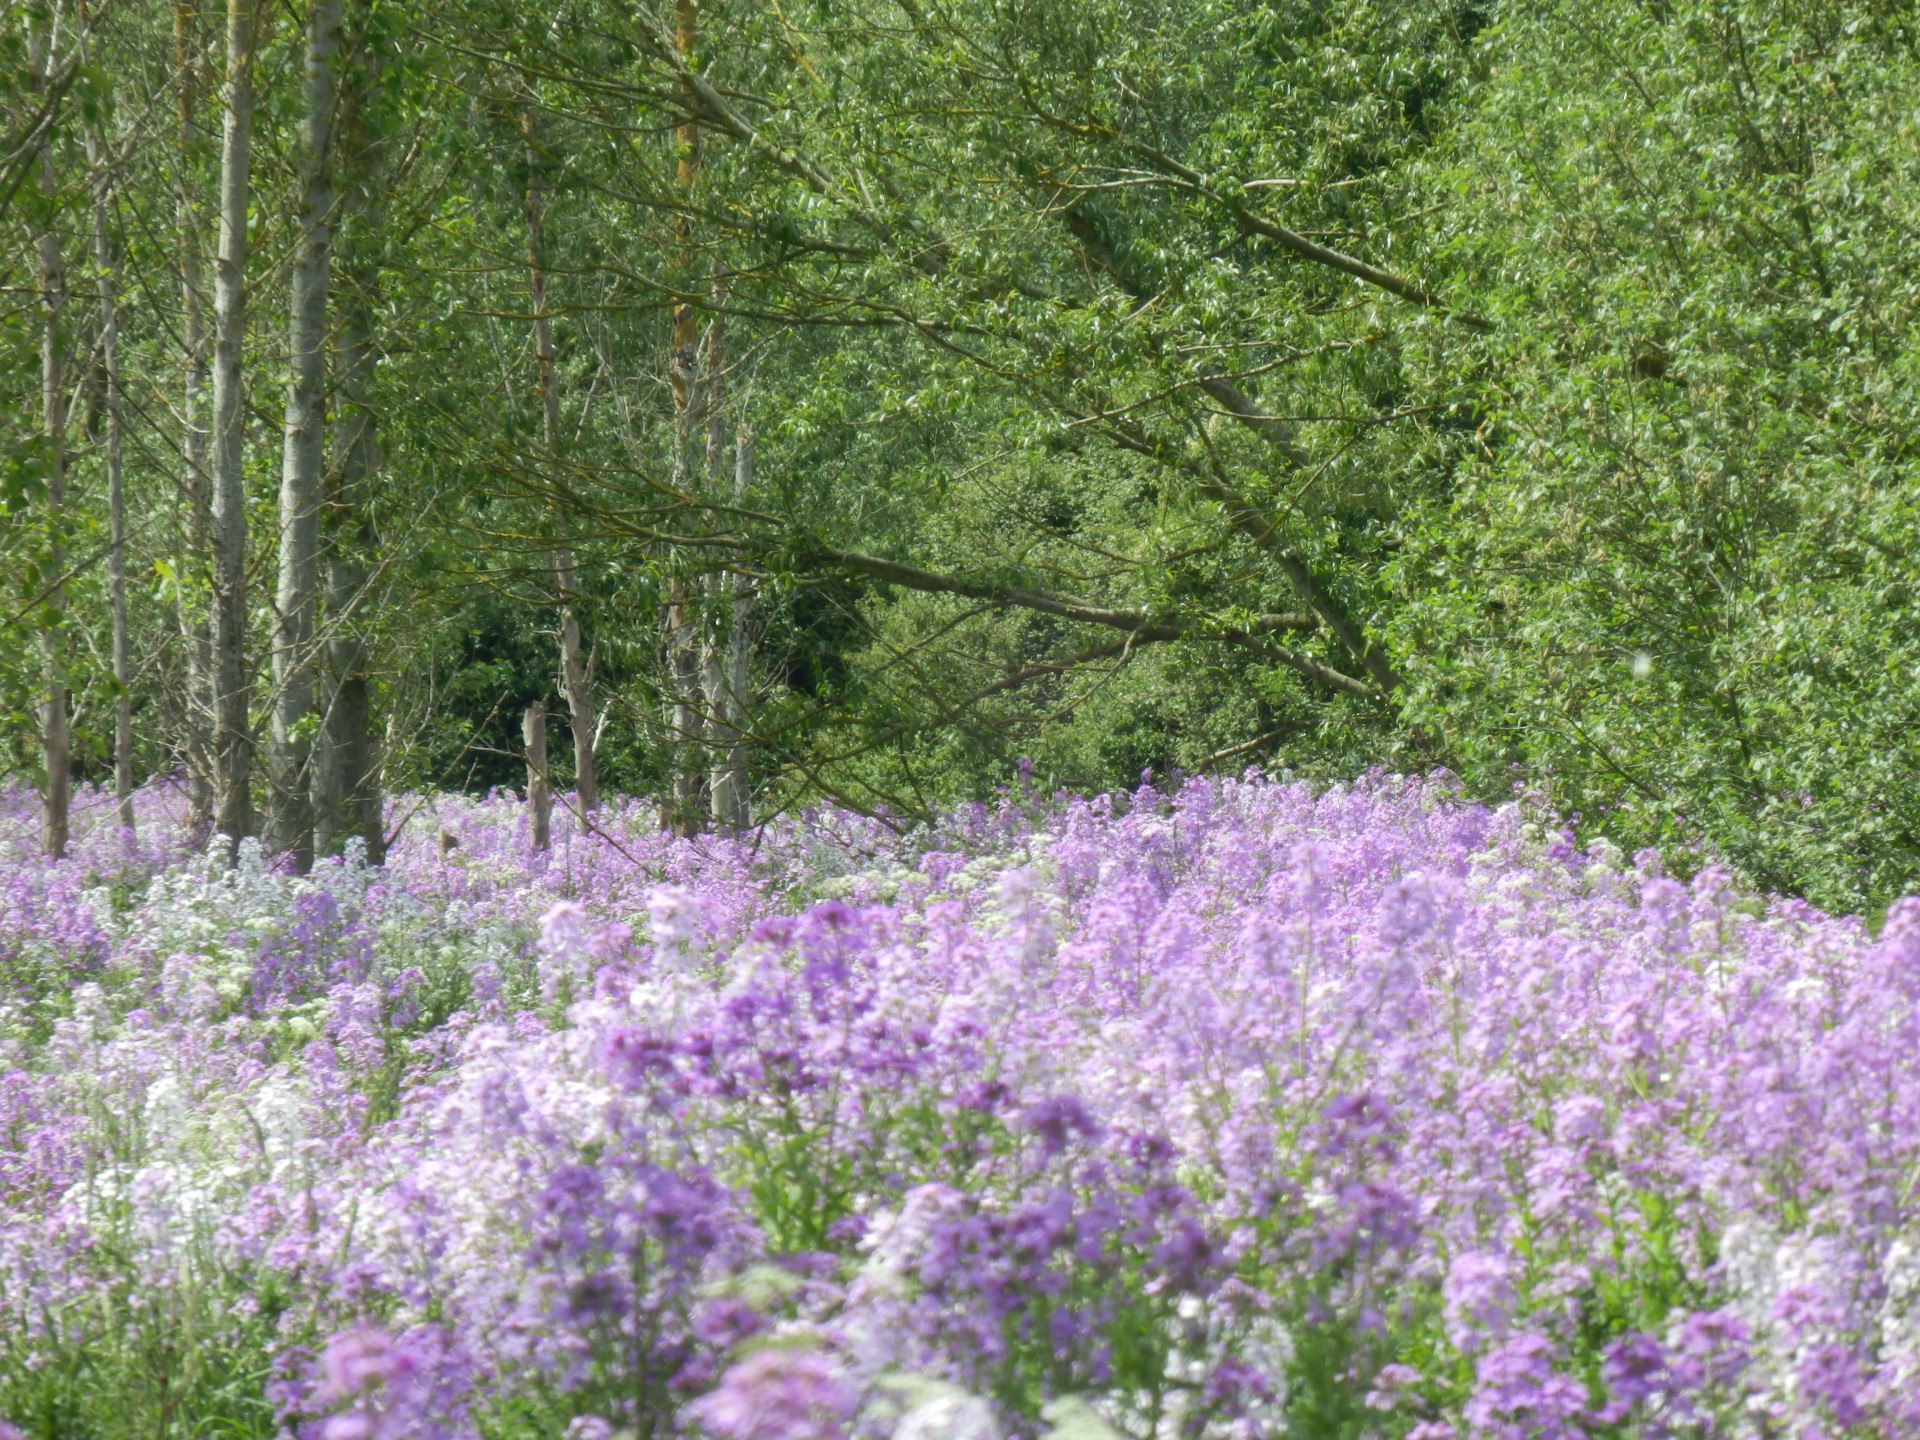 In a blurred sea of lavender with trees growing all directions!